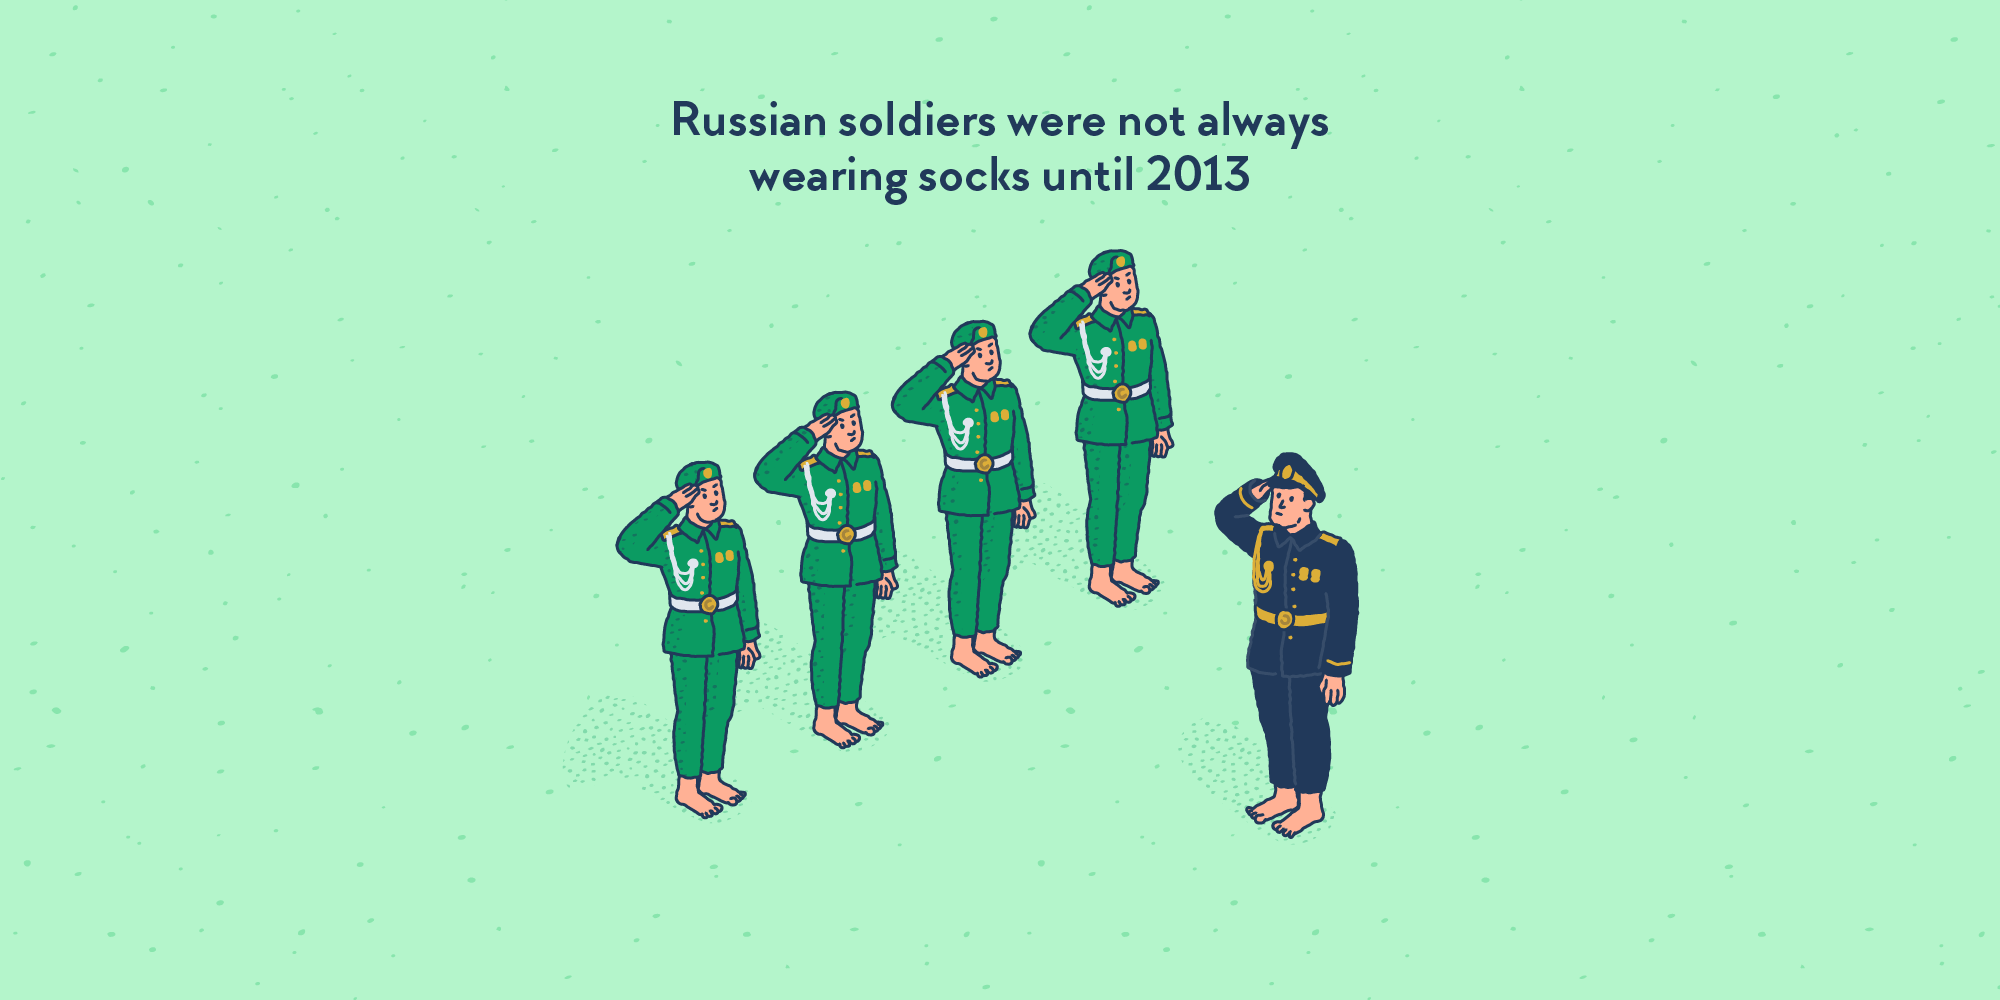 A group of Russian soldiers in full uniform, but barefoot.